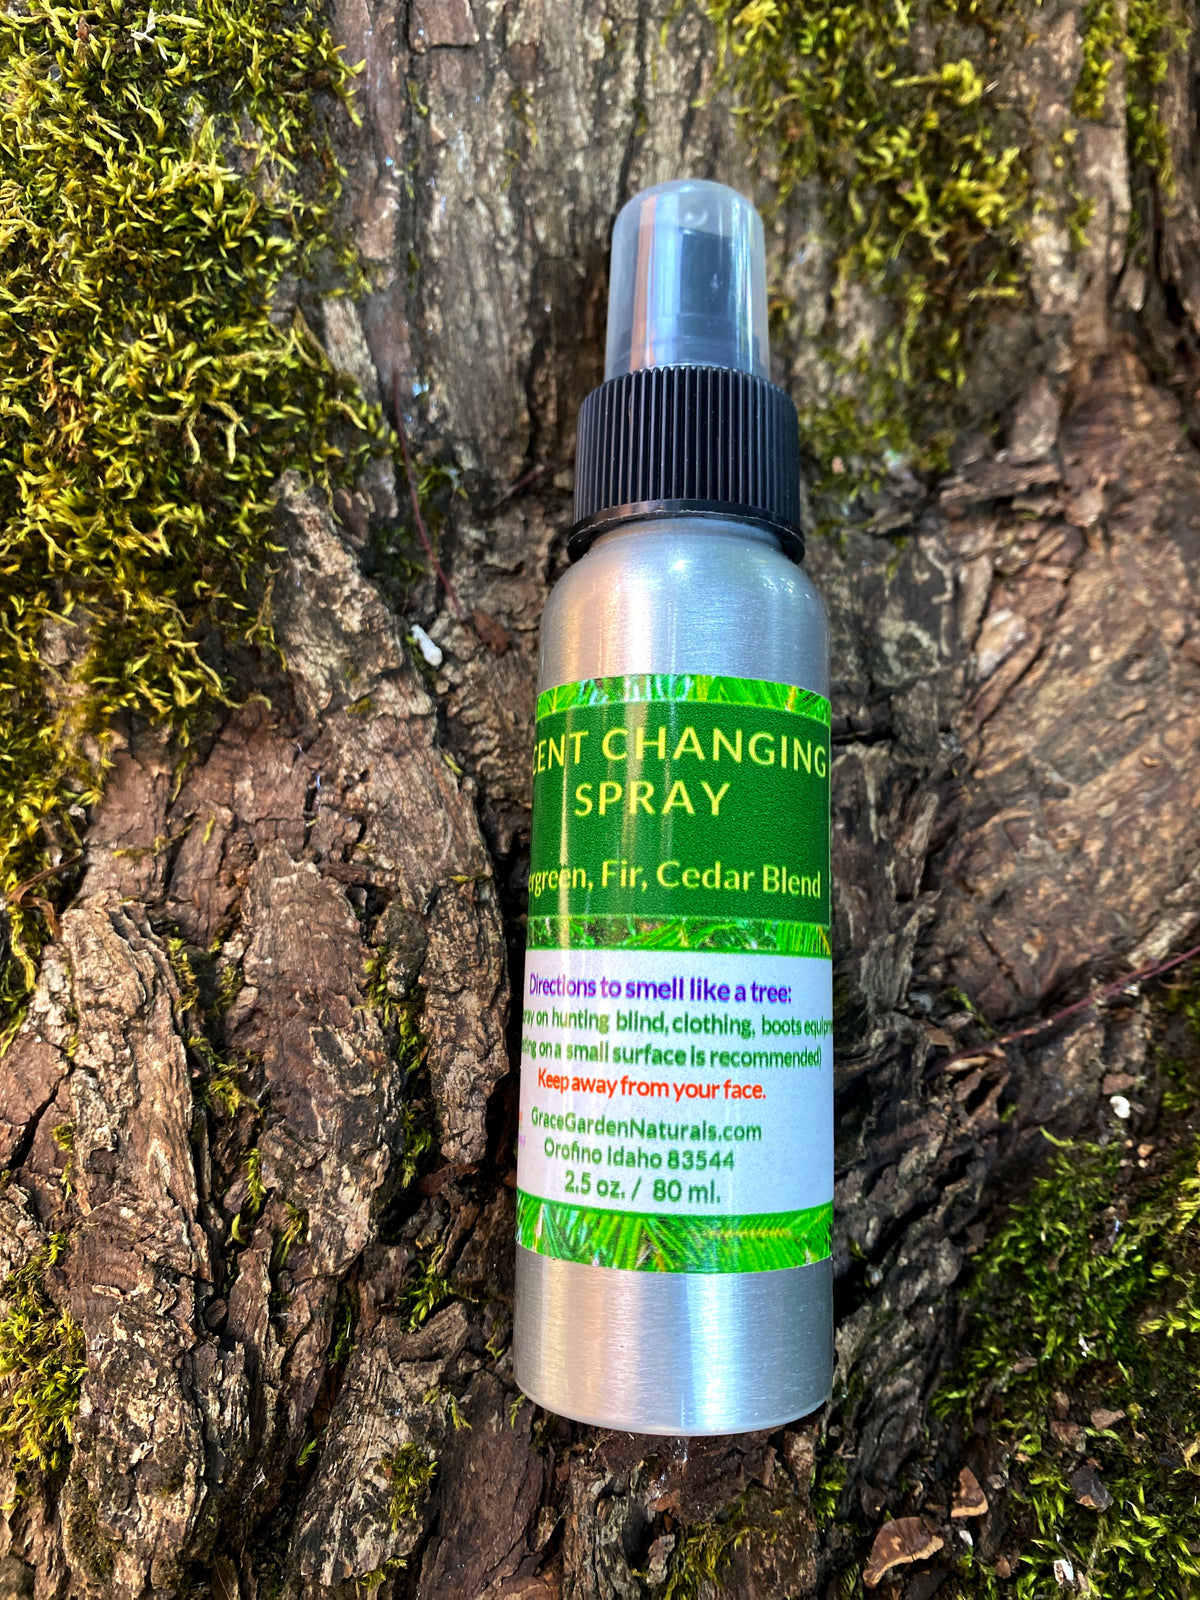 HUNTERS: Scent Changing Spray: Natural, with Real Plant Oils and Ingredients